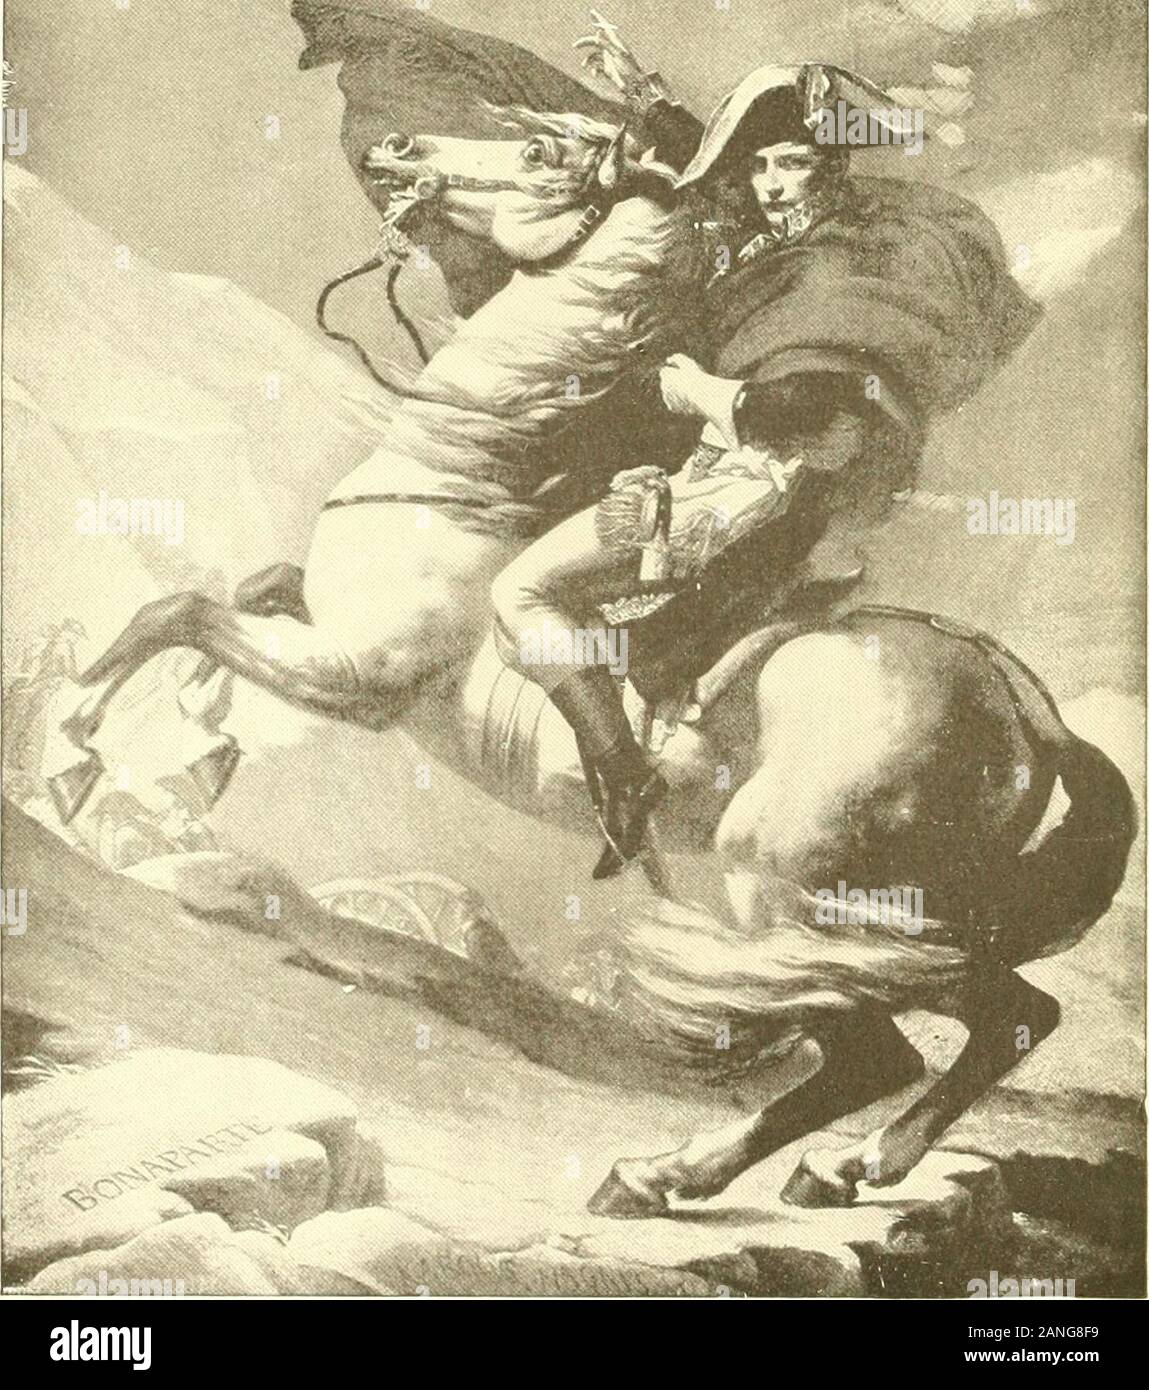 From 1800 to 1900The wonderful story of the century; its progress and  achievements .. . NAPOLEON CROSSING THE ALPS The renowned exploit of  Hannibal leading an army across the lofty and frozen